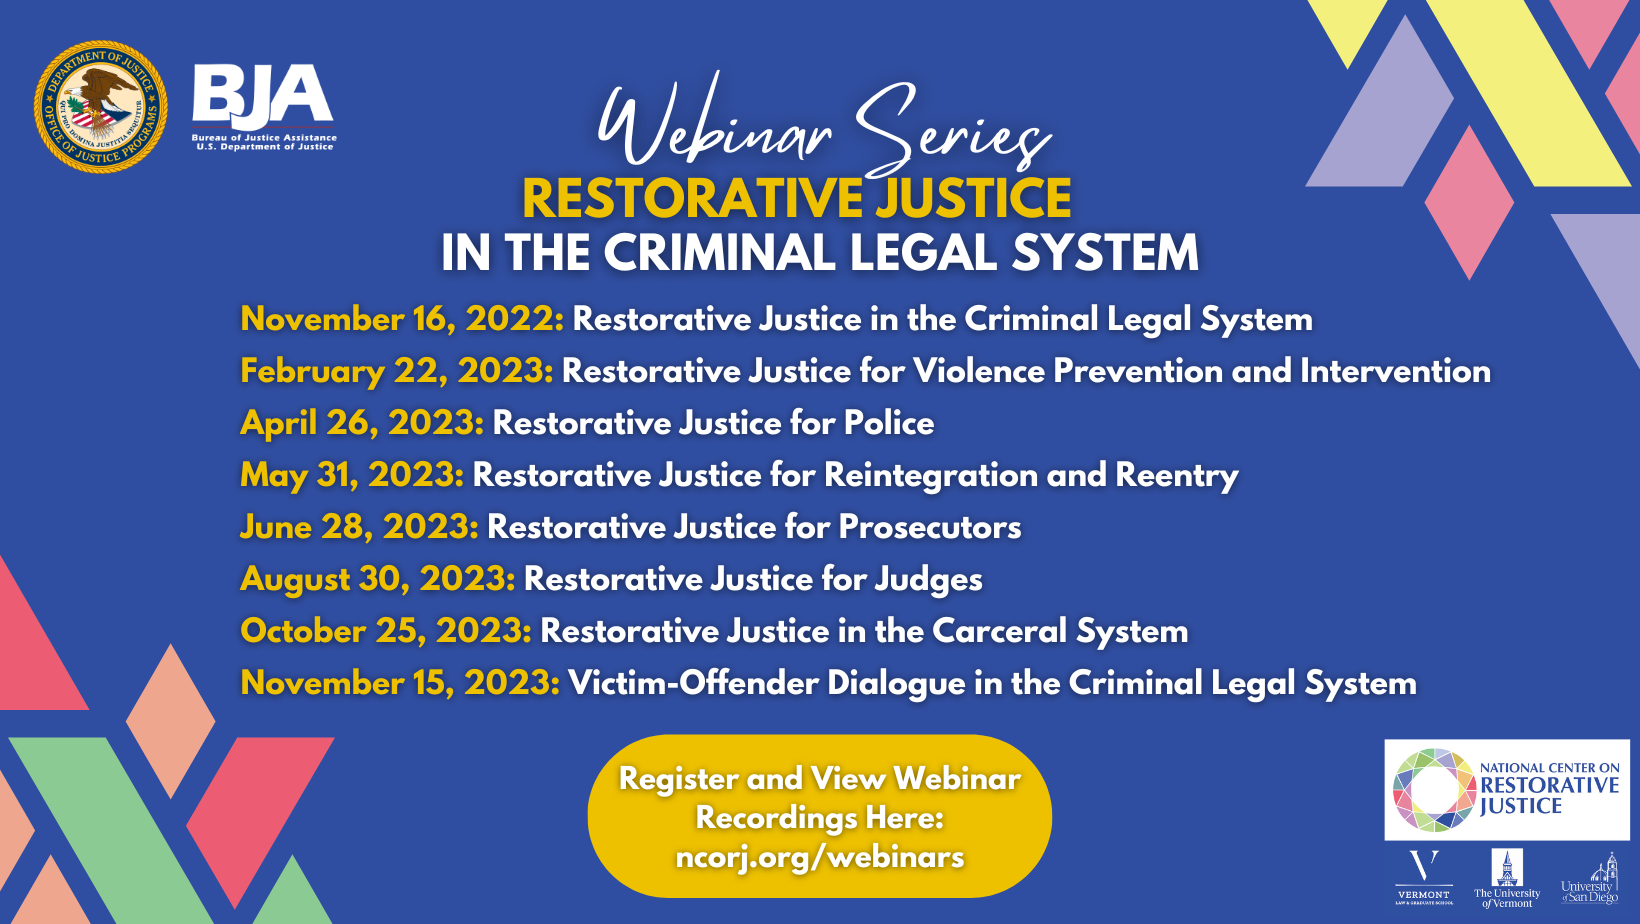 This is a flyer for the Webinar Series Restorative Justice in the Criminal Legal System. November 16, 2022 Restorative Justice in the Criminal Legal System February 22, 2023 Restorative Justice for Violence Prevention and Intervention April 26, 2023 Restorative Justice for Police May 31, 2023 Restorative Justice for Reintegration and Reentry June 28, 2023 Restorative Justice for Prosecutors August 30, 2023 Restorative Justice for Judges October 25 2023 Restorative Justice in the Carceral System November 15 2023 Victim-Offender Dialogue in the Criminal Legal System At the bottom of the image text that reads Register and View Webinar Recordings Here: ncorj.org/webinars